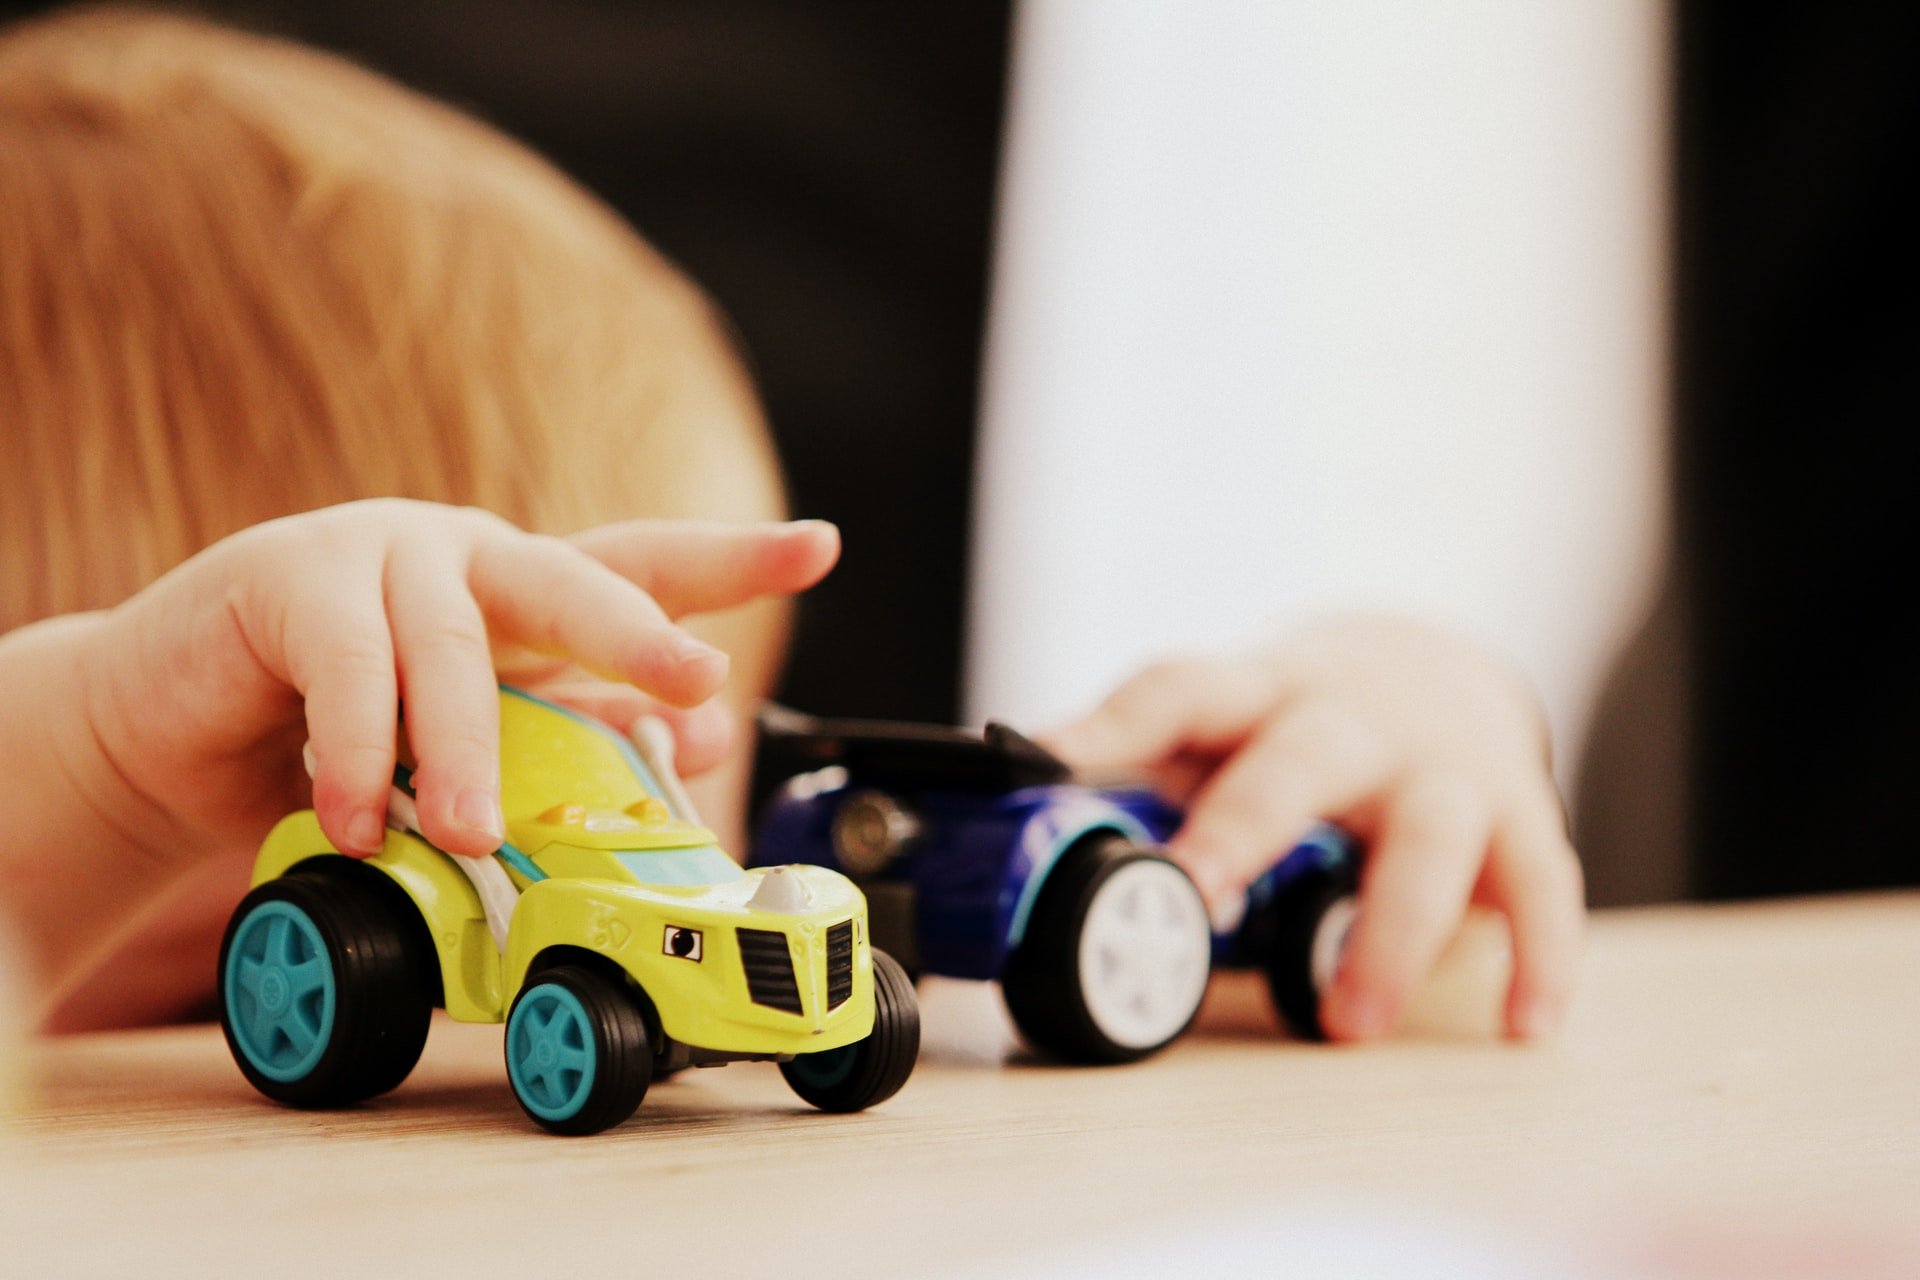 Plastic toys contain cancer causing chemicals